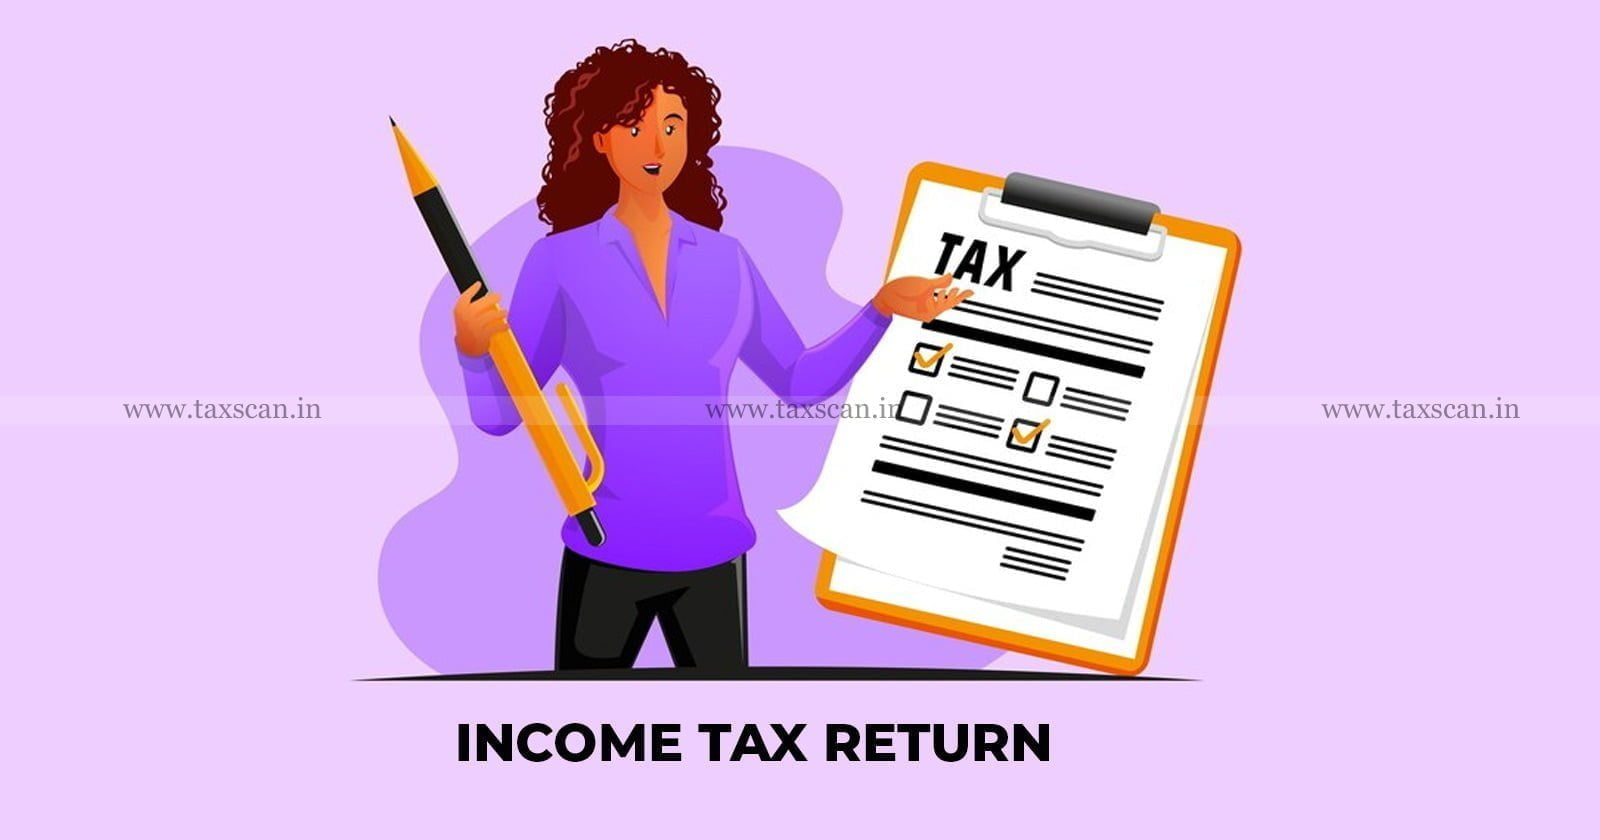 50 Days Left to file Income Tax Returns - ITR - Income Tax Returns - taxscan